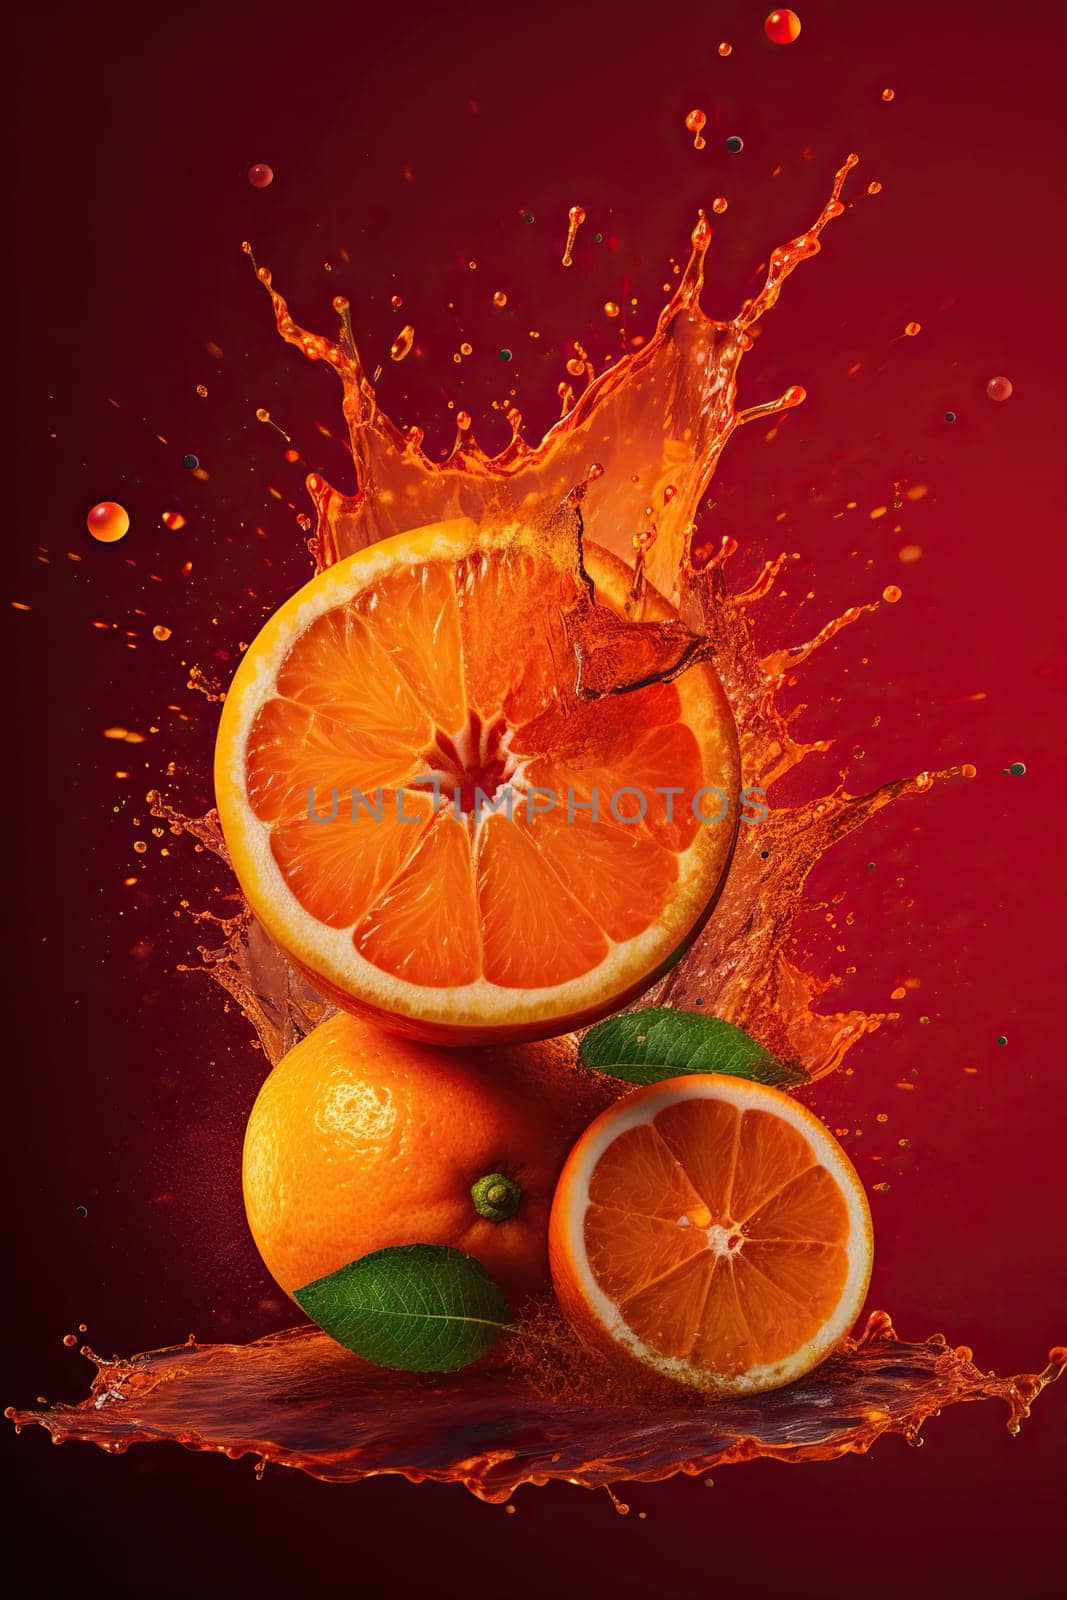 Juicy Orange Splashes And Drops Of Juice In Flight Stand Out Against An Orange Background